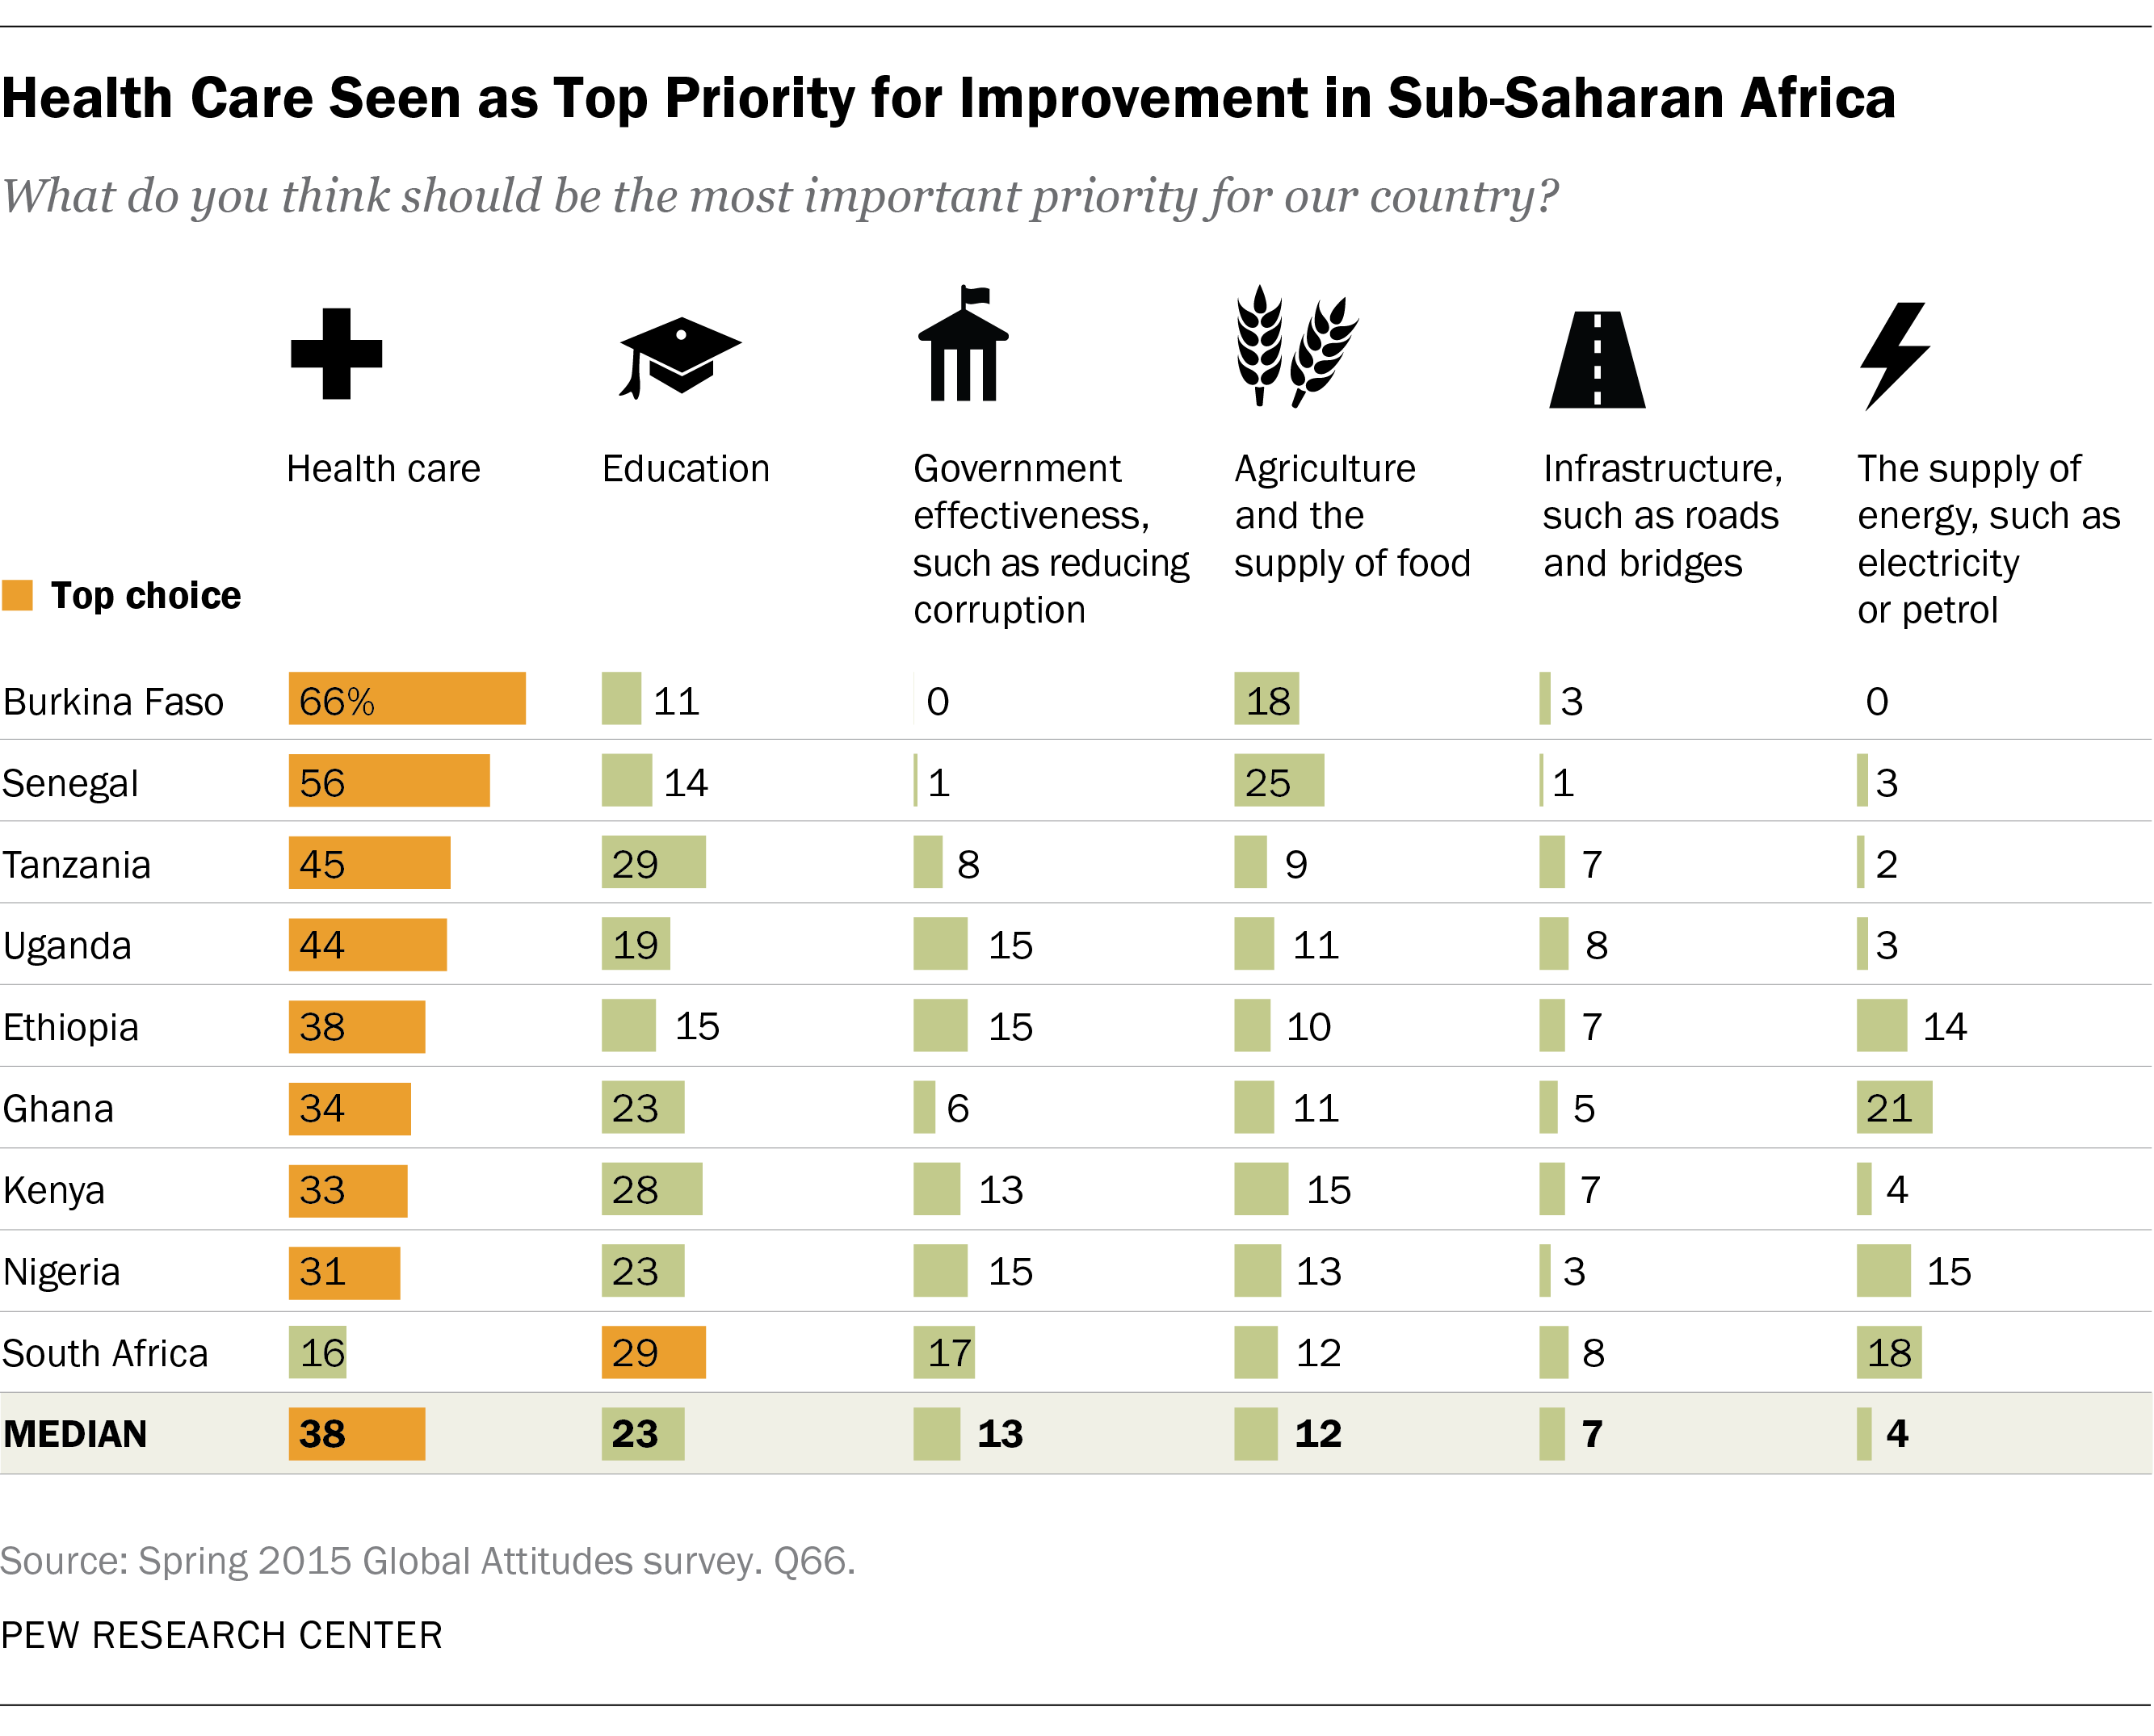 Health Care Seen as Top Priority for Improvement in Sub-Saharan Africa